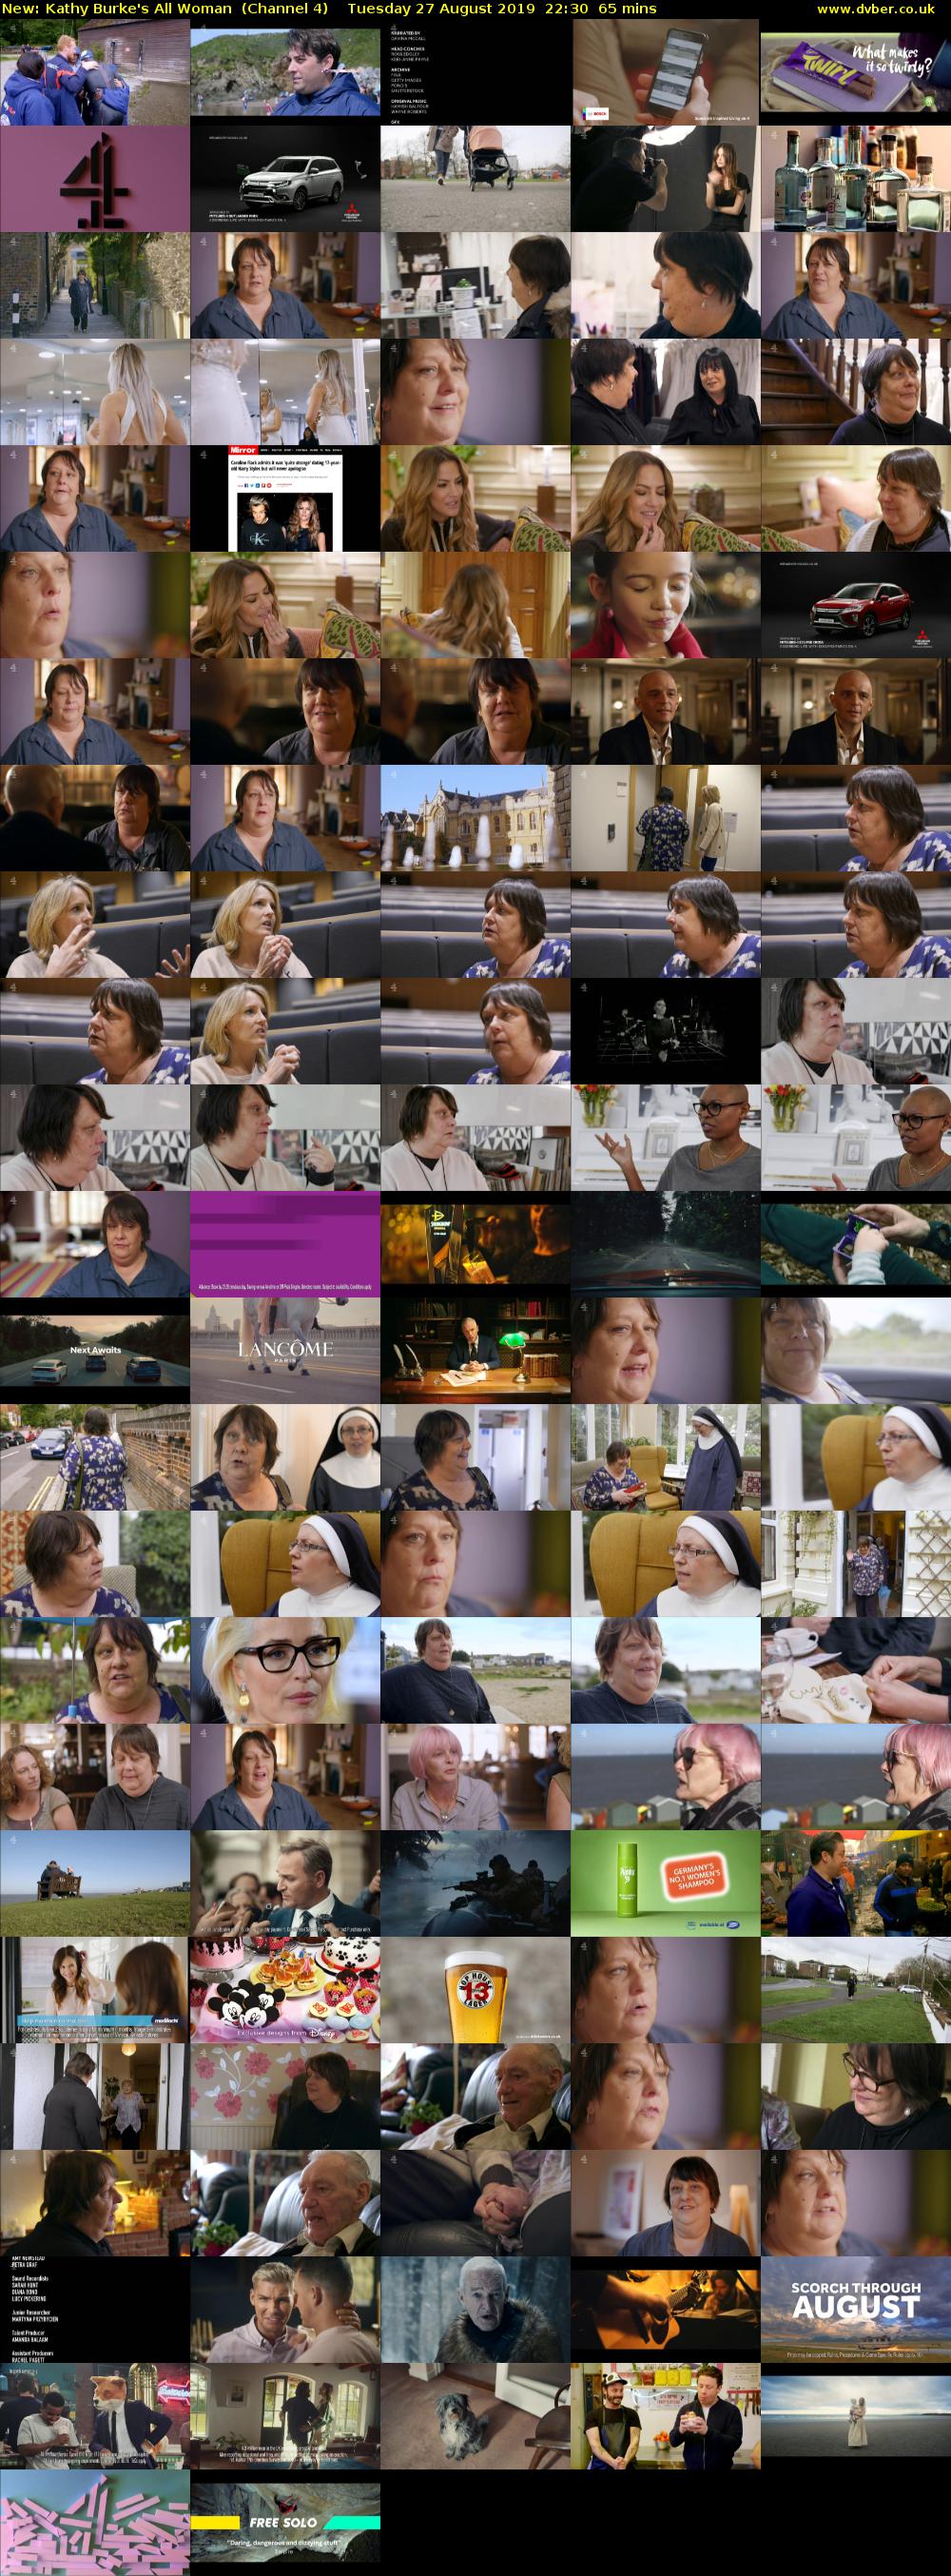 Kathy Burke's All Woman (Channel 4) Tuesday 27 August 2019 22:30 - 23:35